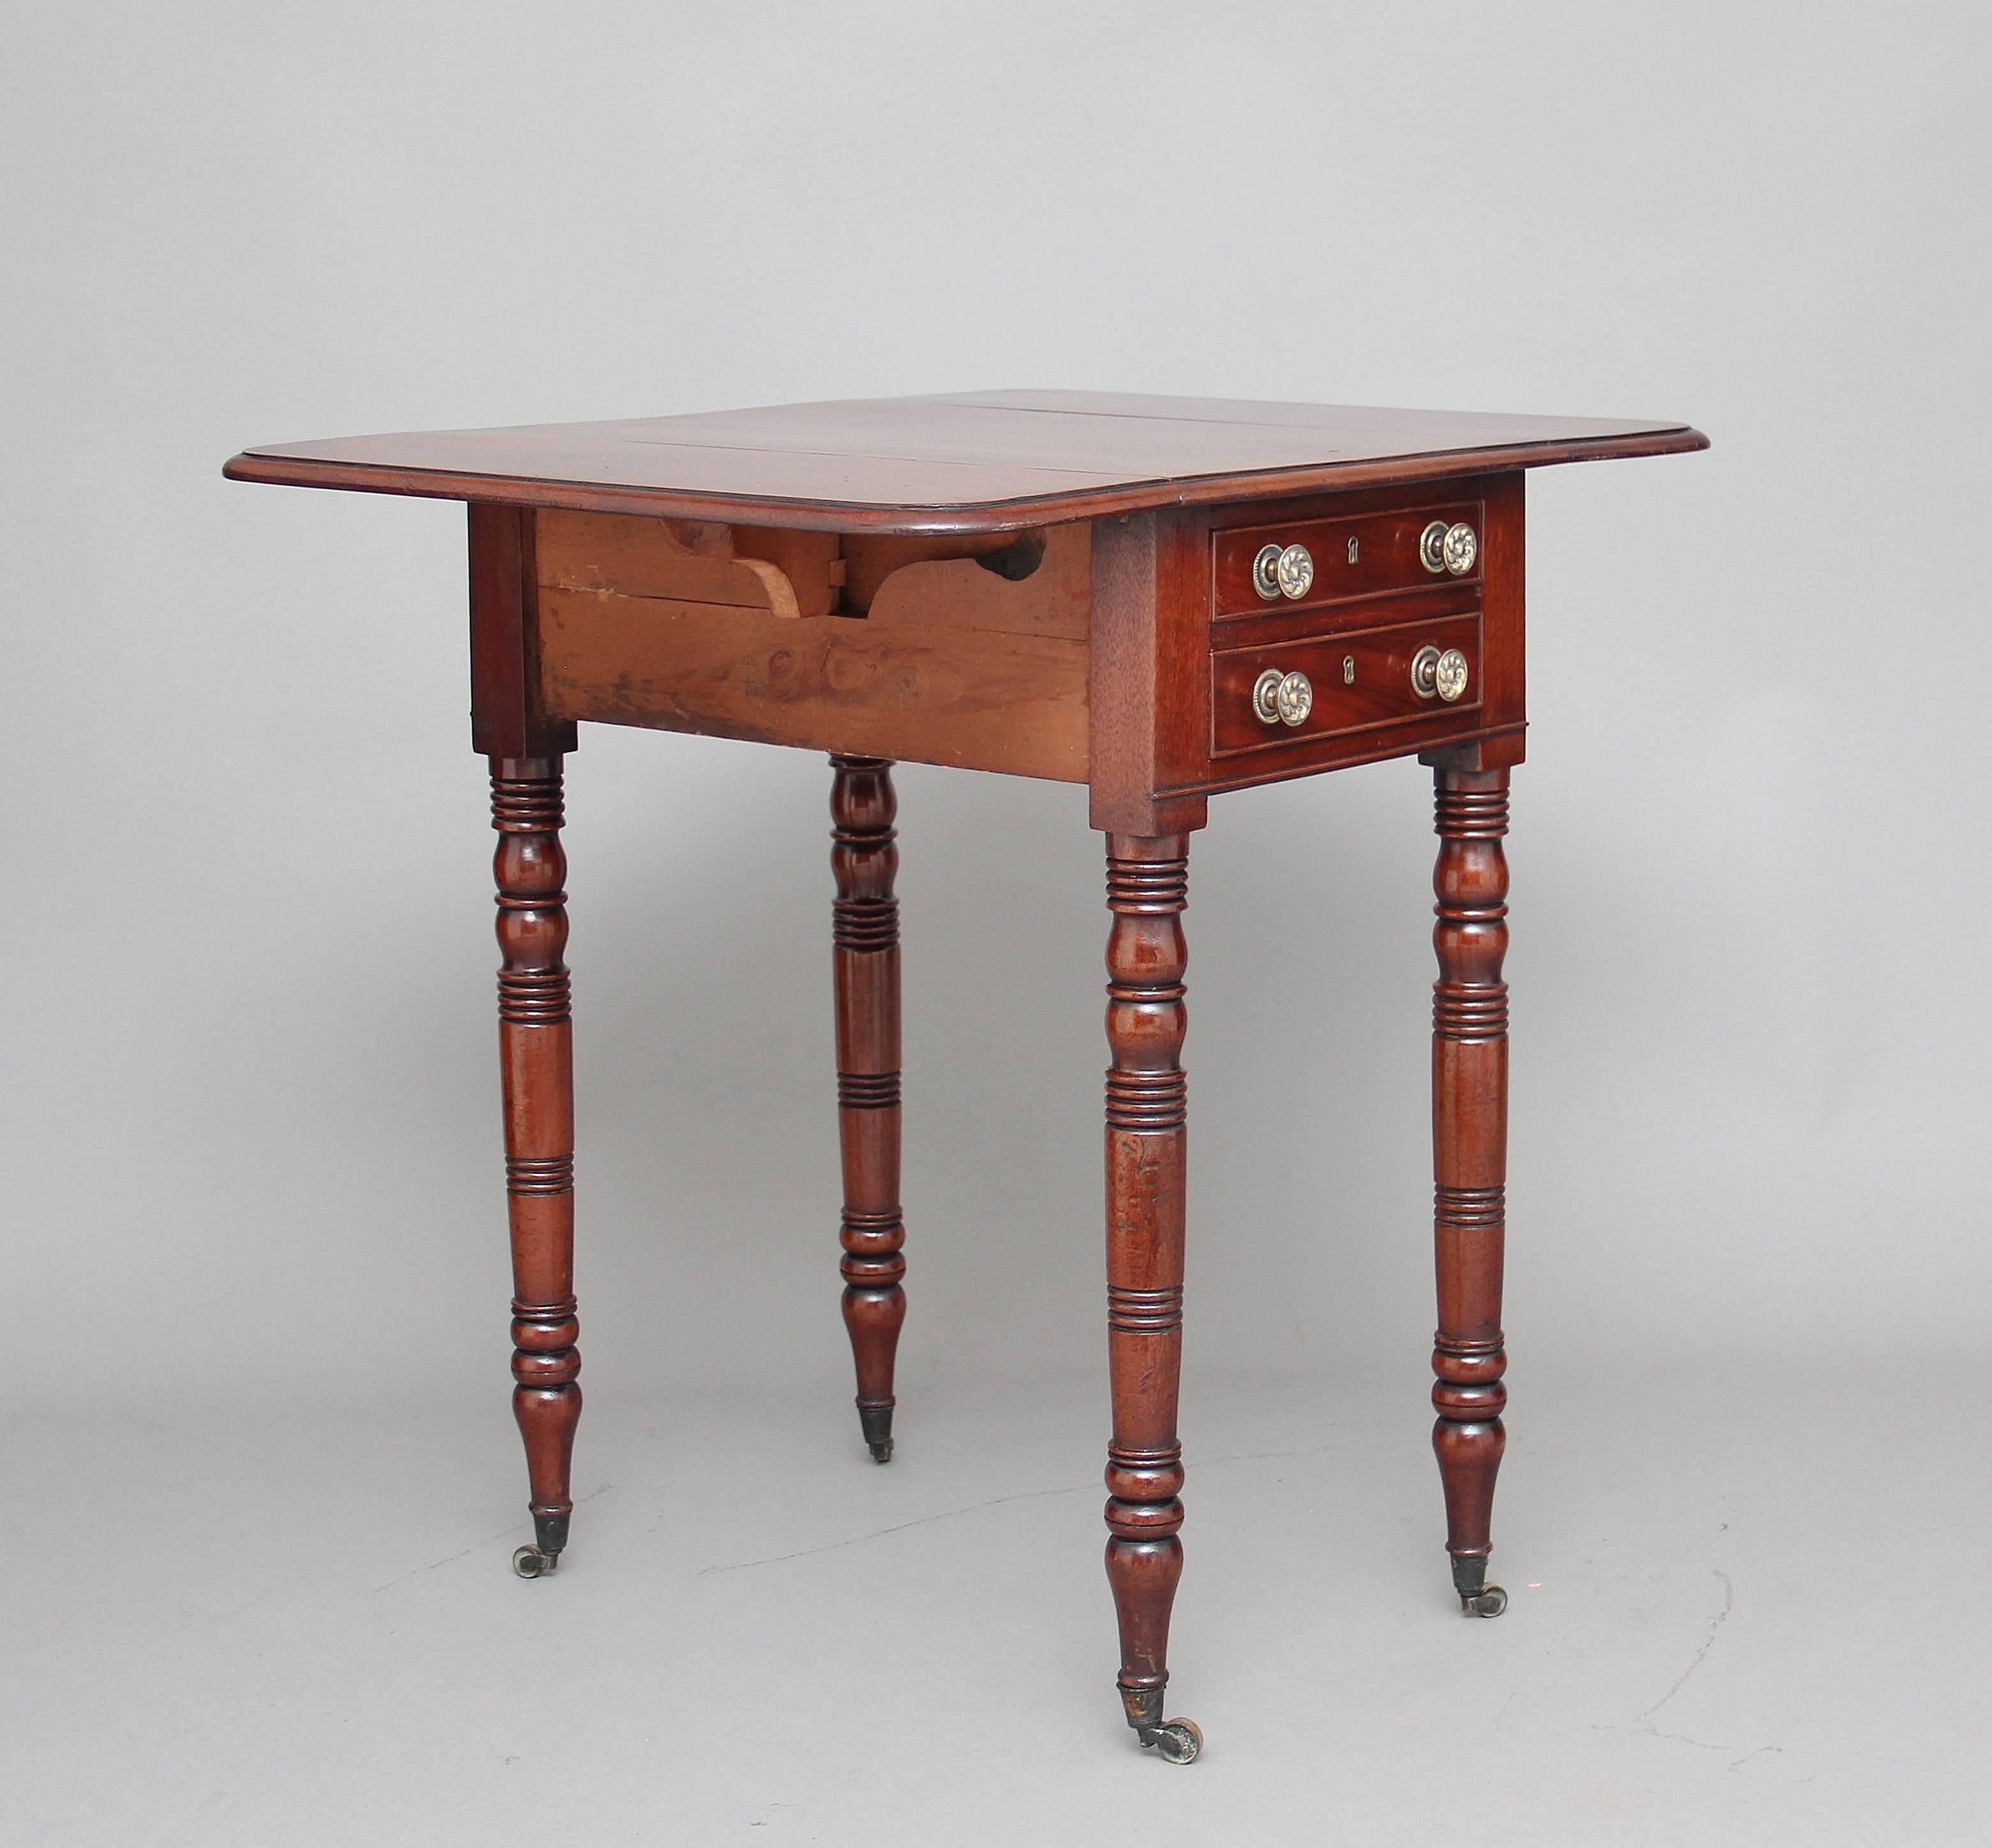 19th century mahogany drop leaf side table, the moulded edge top which extends to 28 1/2” (73cms), with two graduated oak lined drawers below with decorative brass turned knobs, the reverse of the table is exactly the same just with faux drawers,